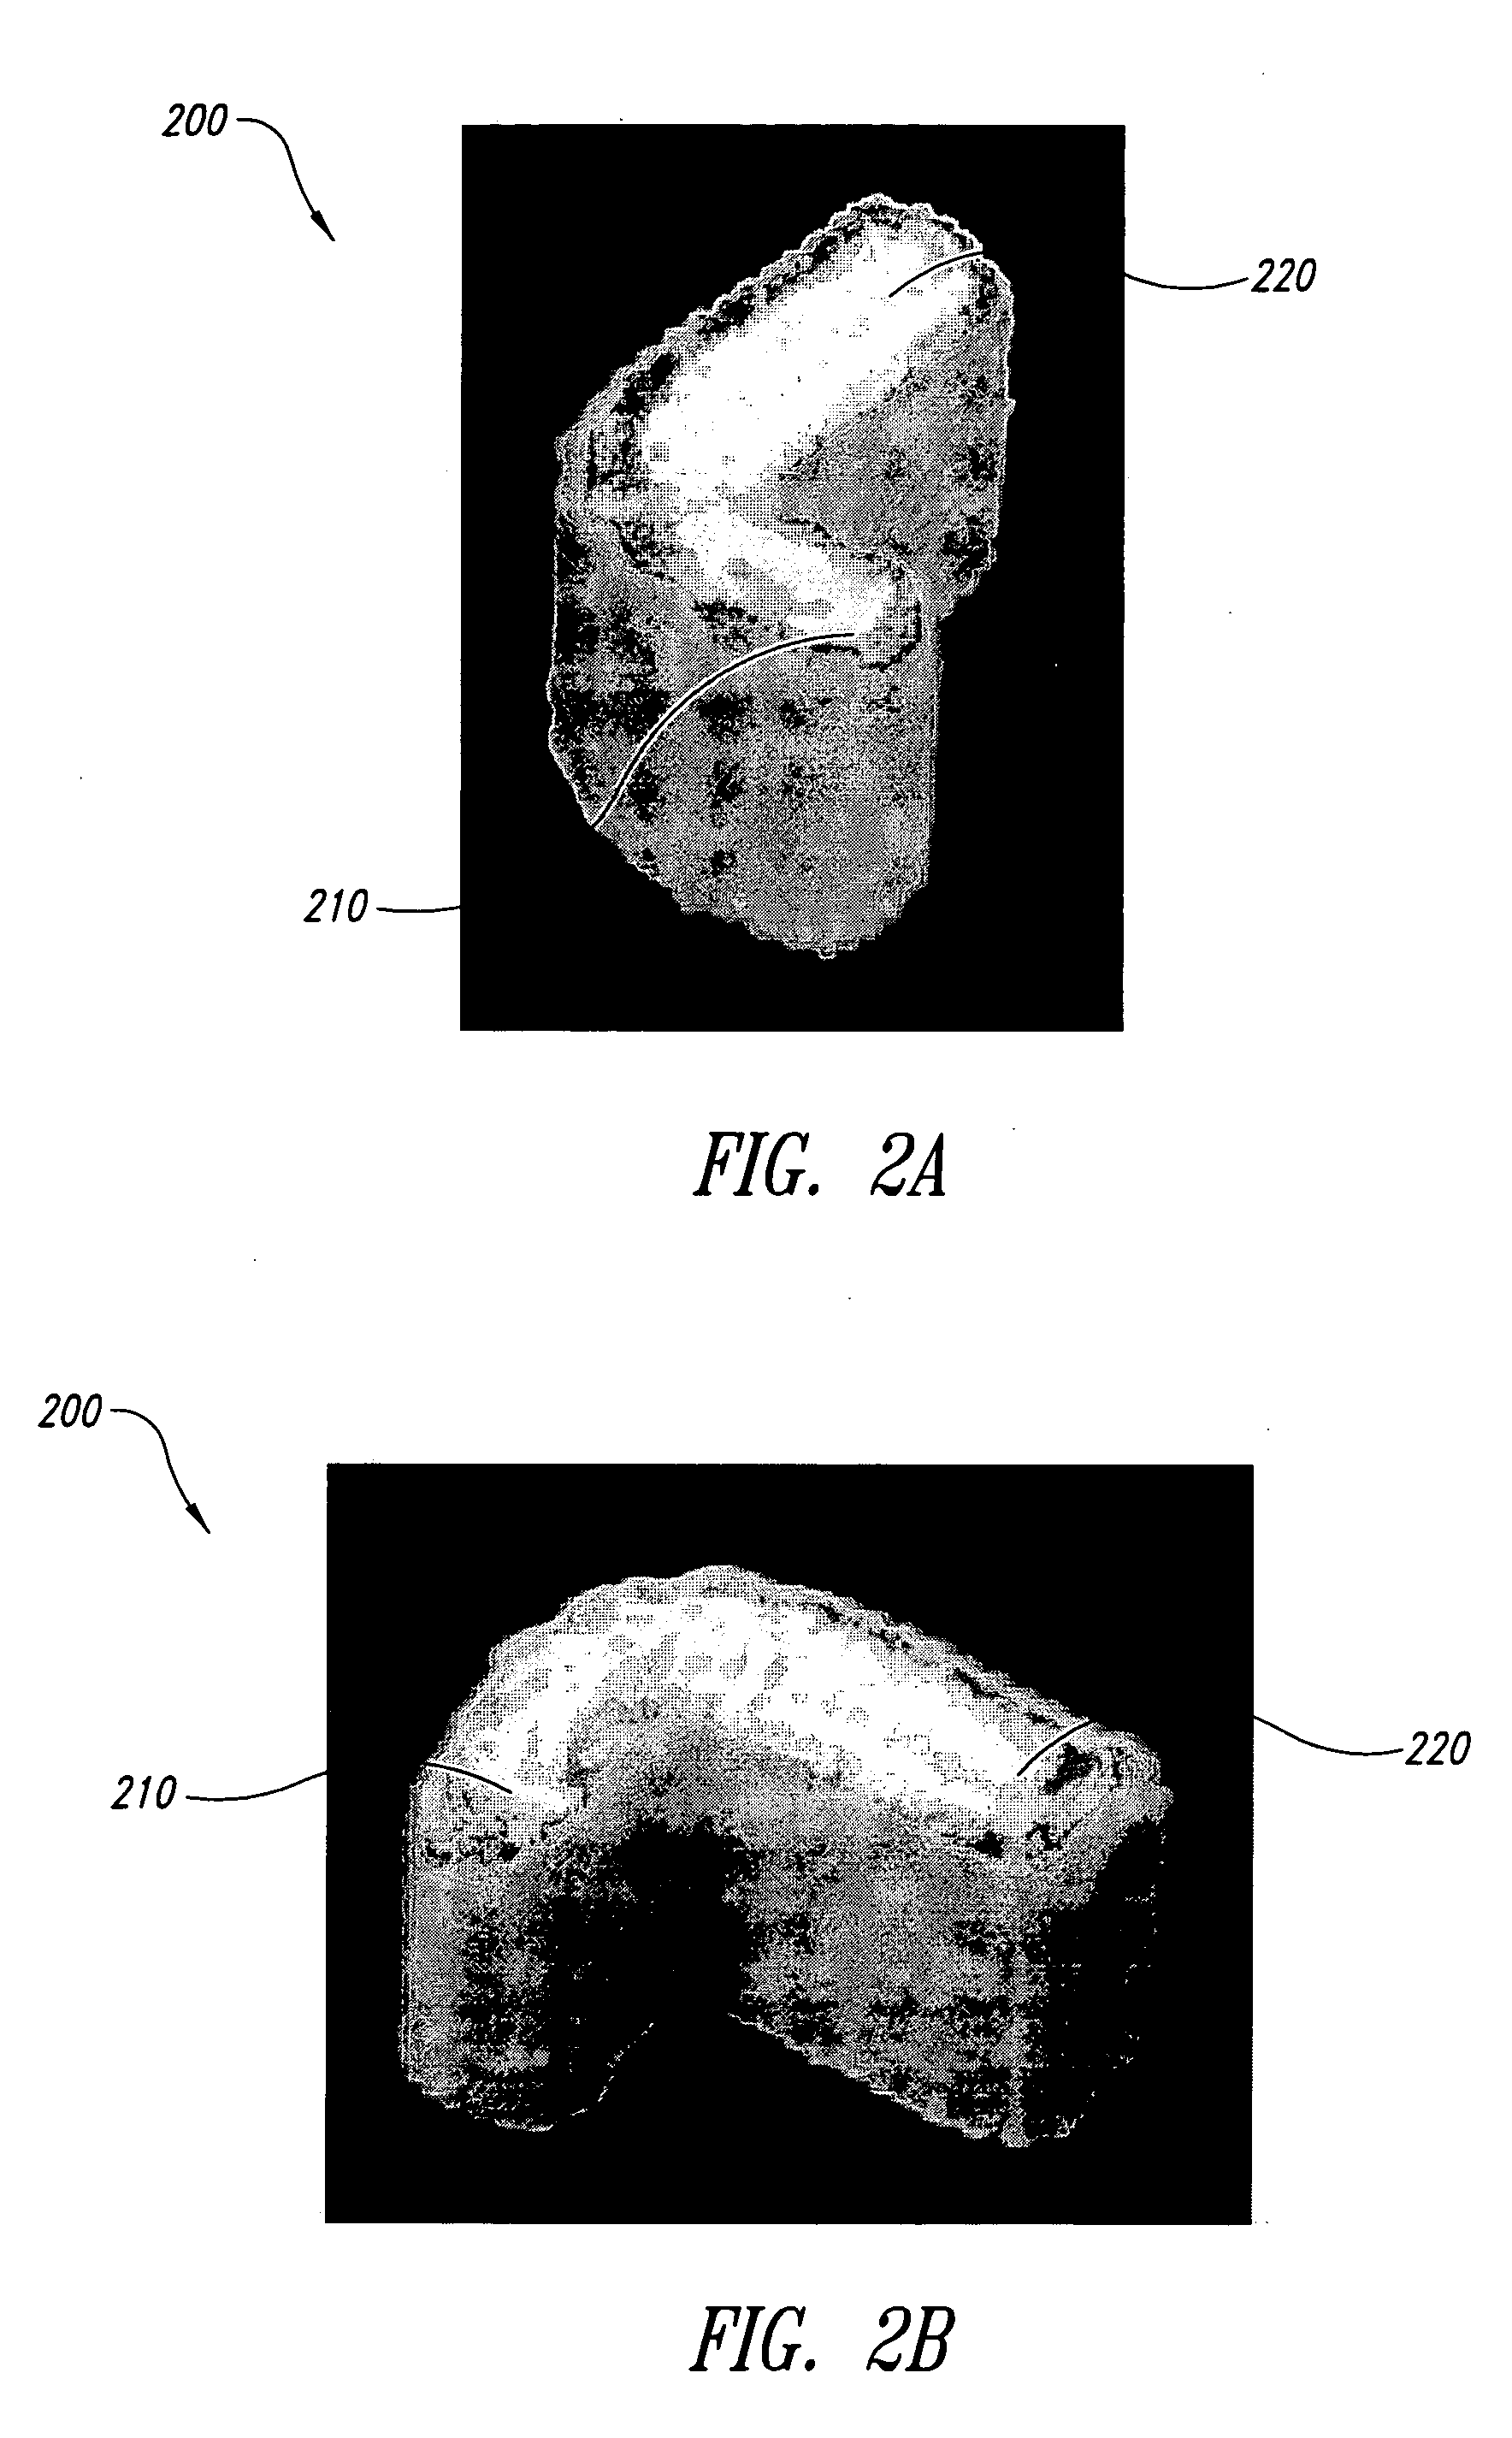 Method of manufacture, installation, and system for an alveolar ridge augmentation graft